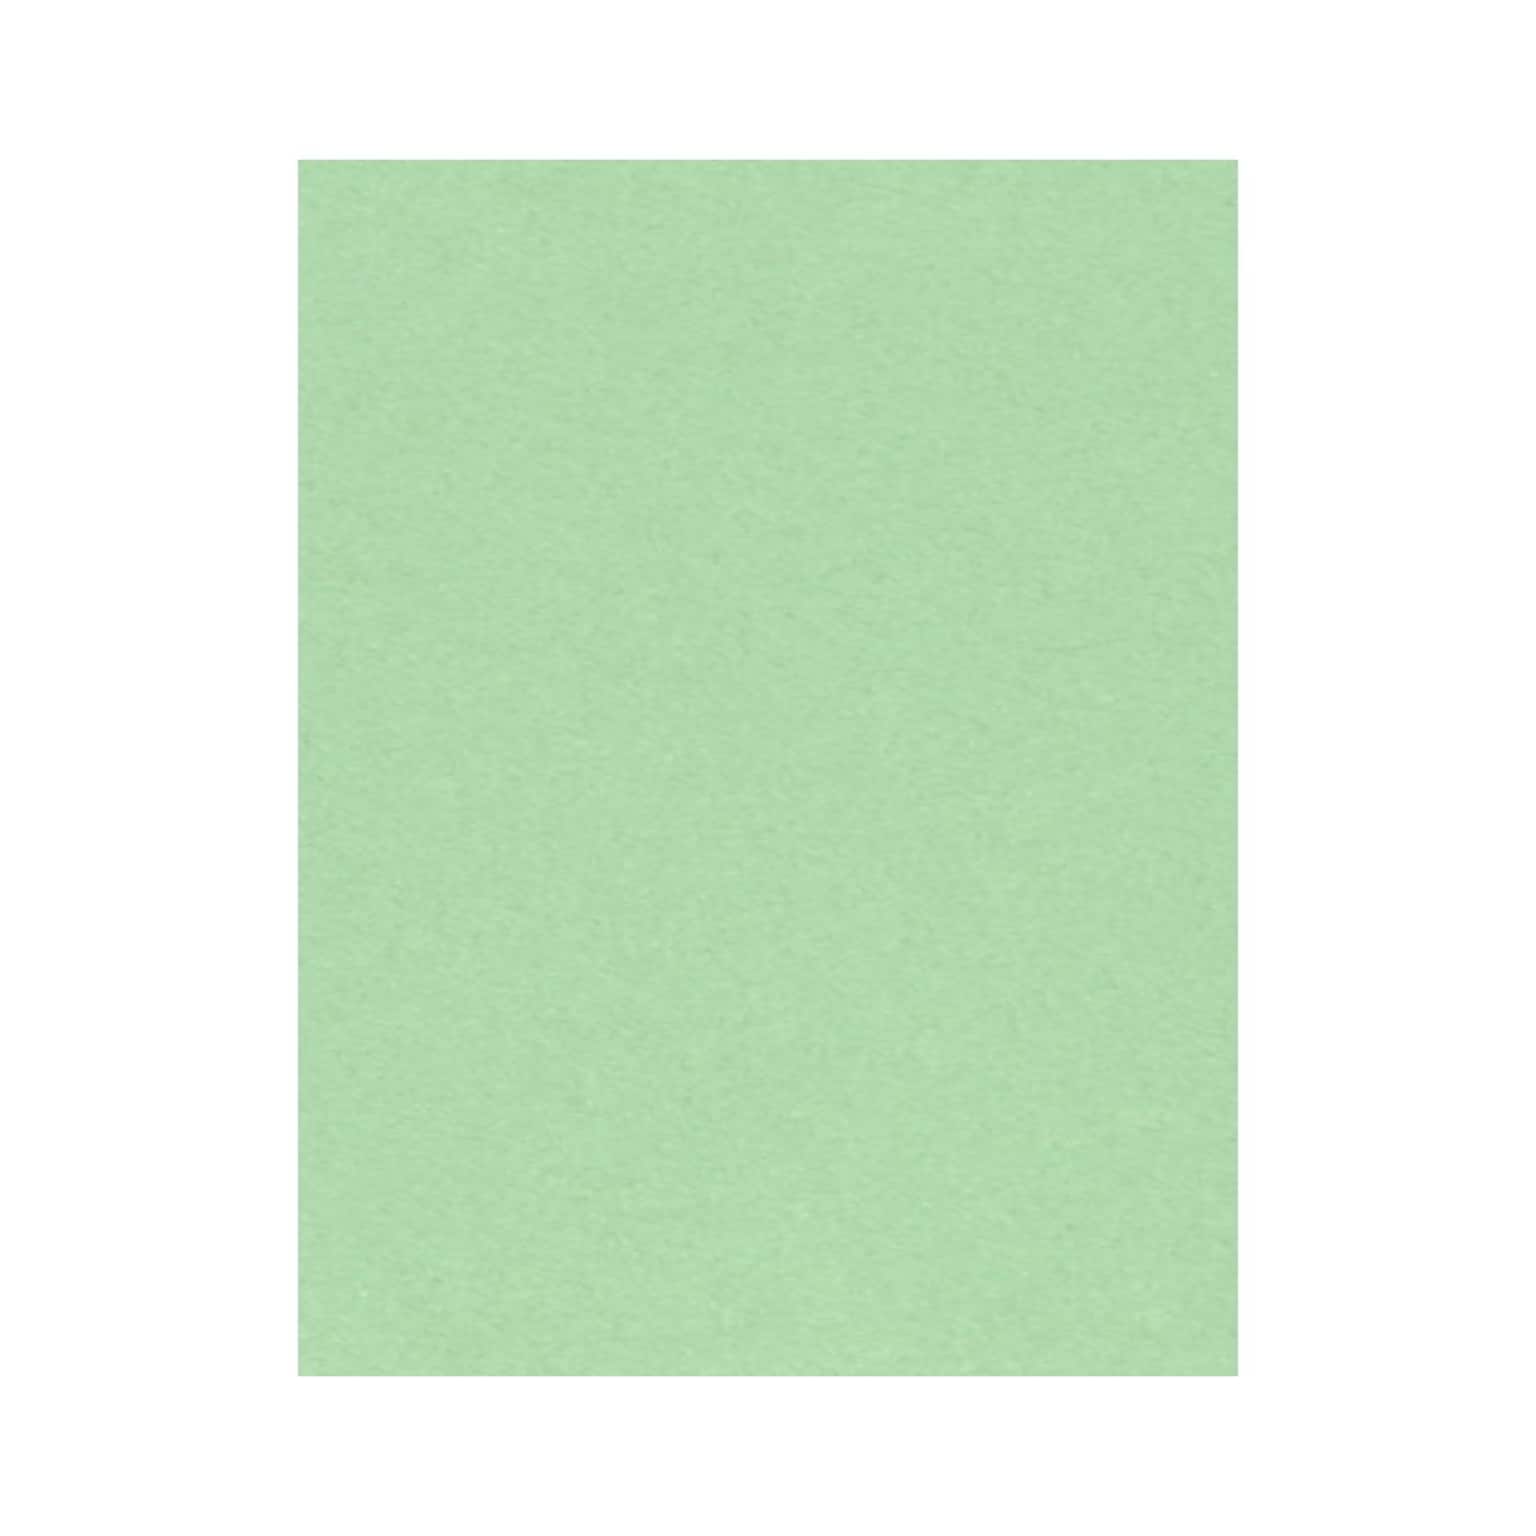 Lux Cardstock 8.5 x 11 inch, Pastel Green 500/Pack